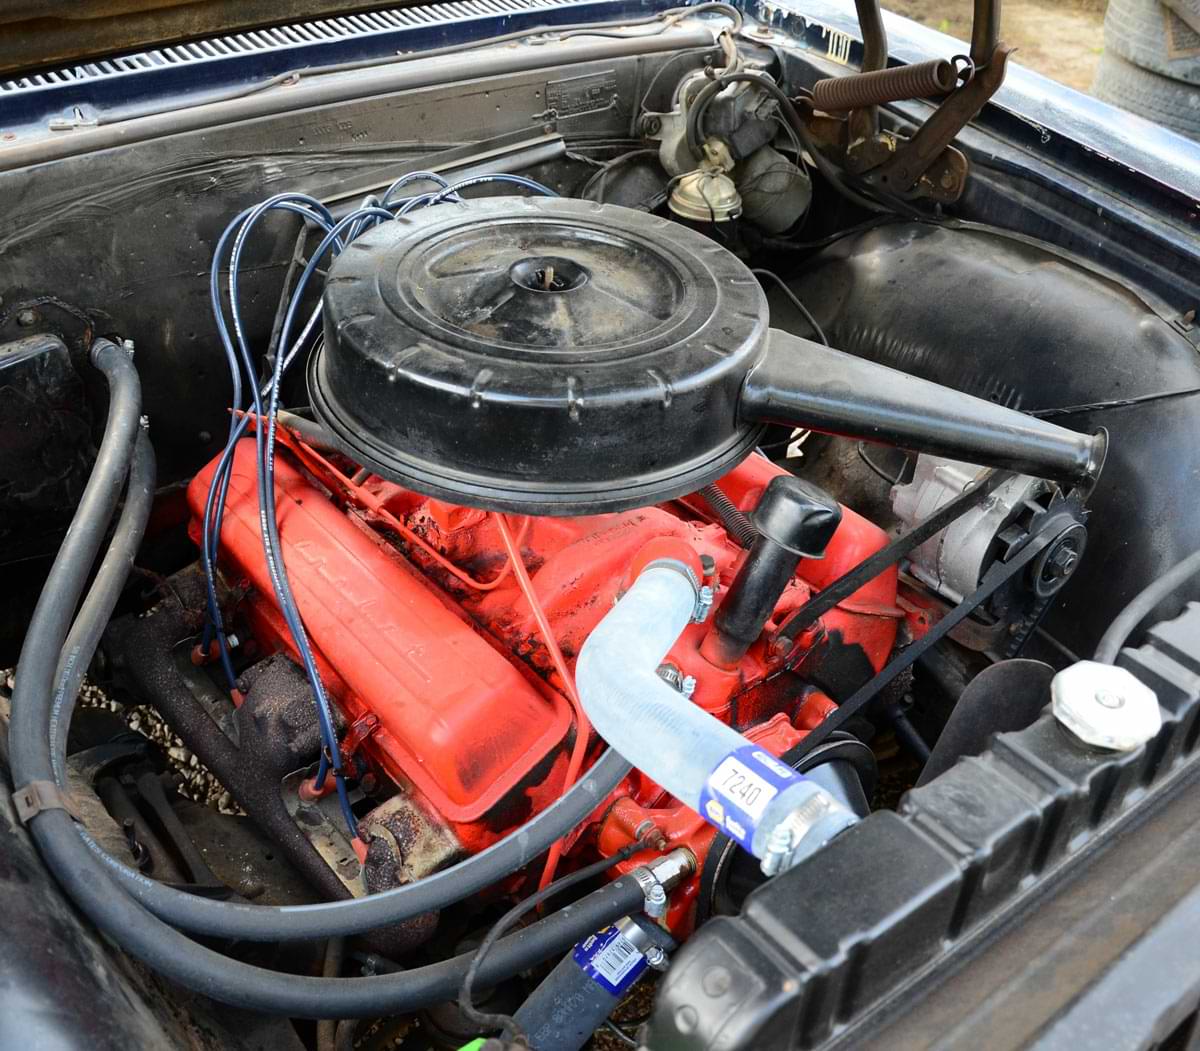 1: Our starting point is a relatively low-mileage, 283ci, small-block Chevy engine, which had recently been tuned up with some generic parts store components